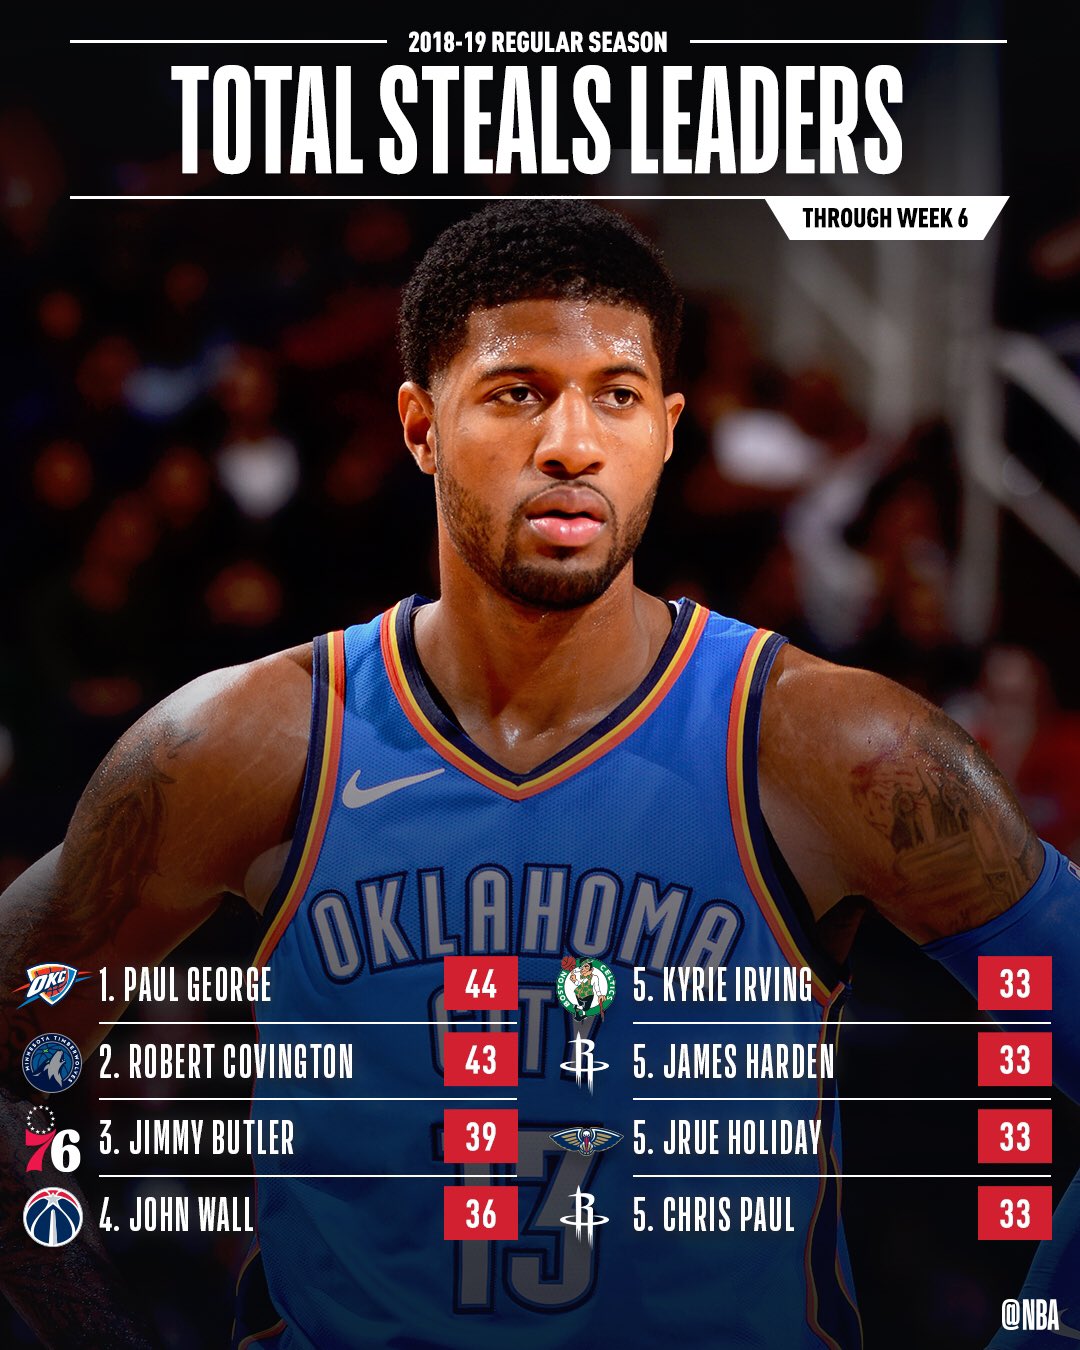 NBA on Twitter "The total STEALS leaders through Week 6 of the NBA